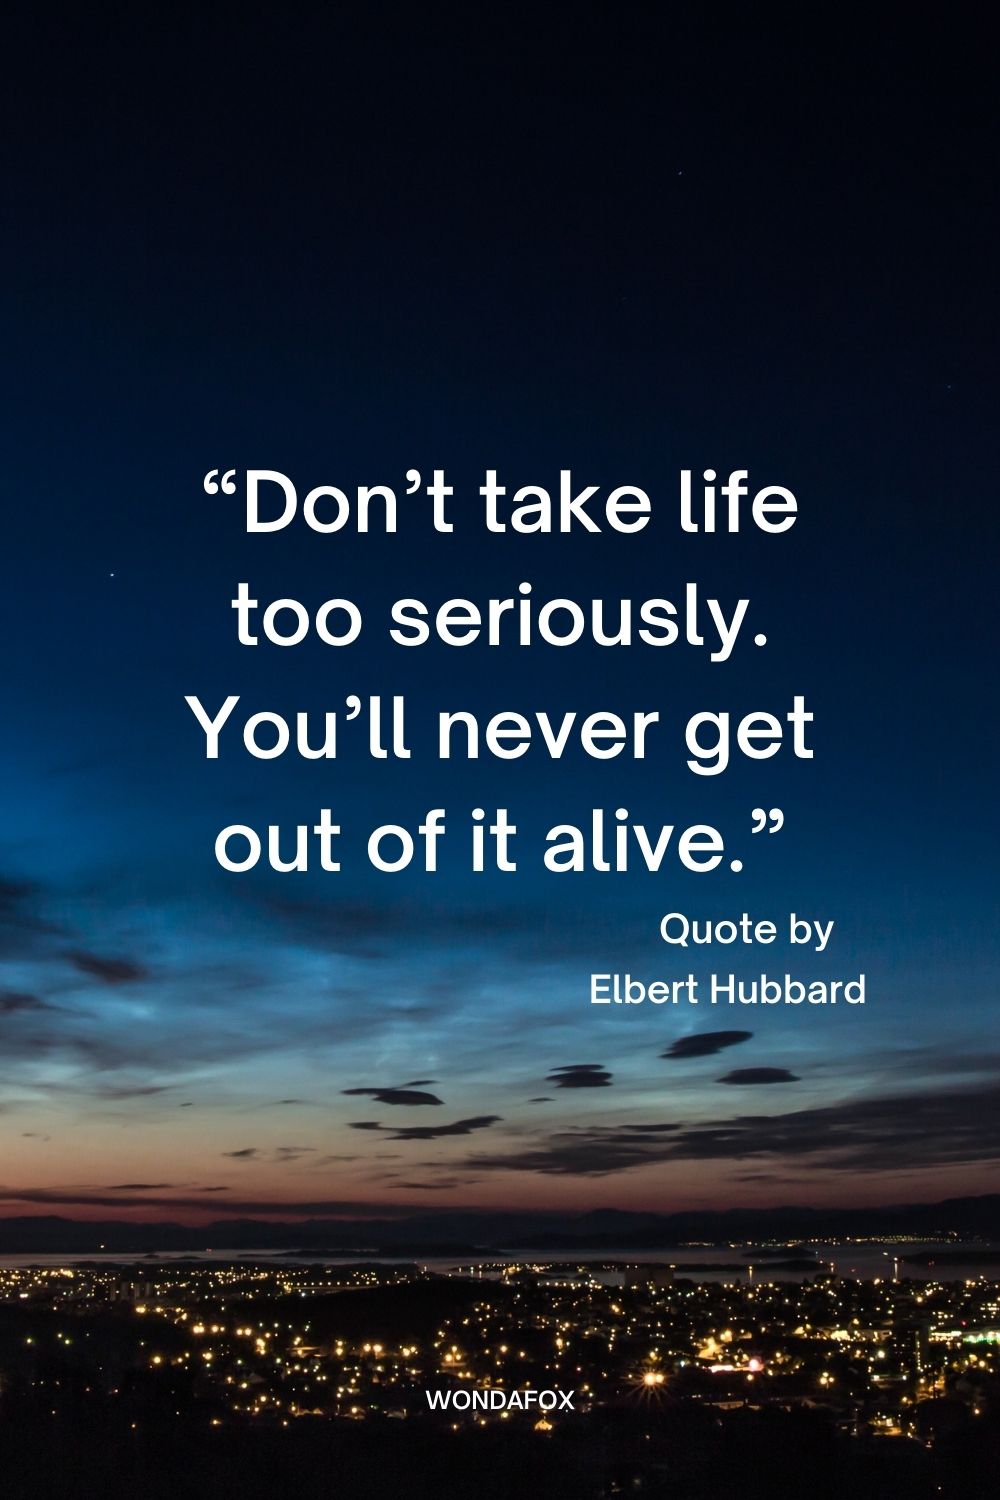 “Don’t take life too seriously. You’ll never get out of it alive.”
Elbert Hubbard